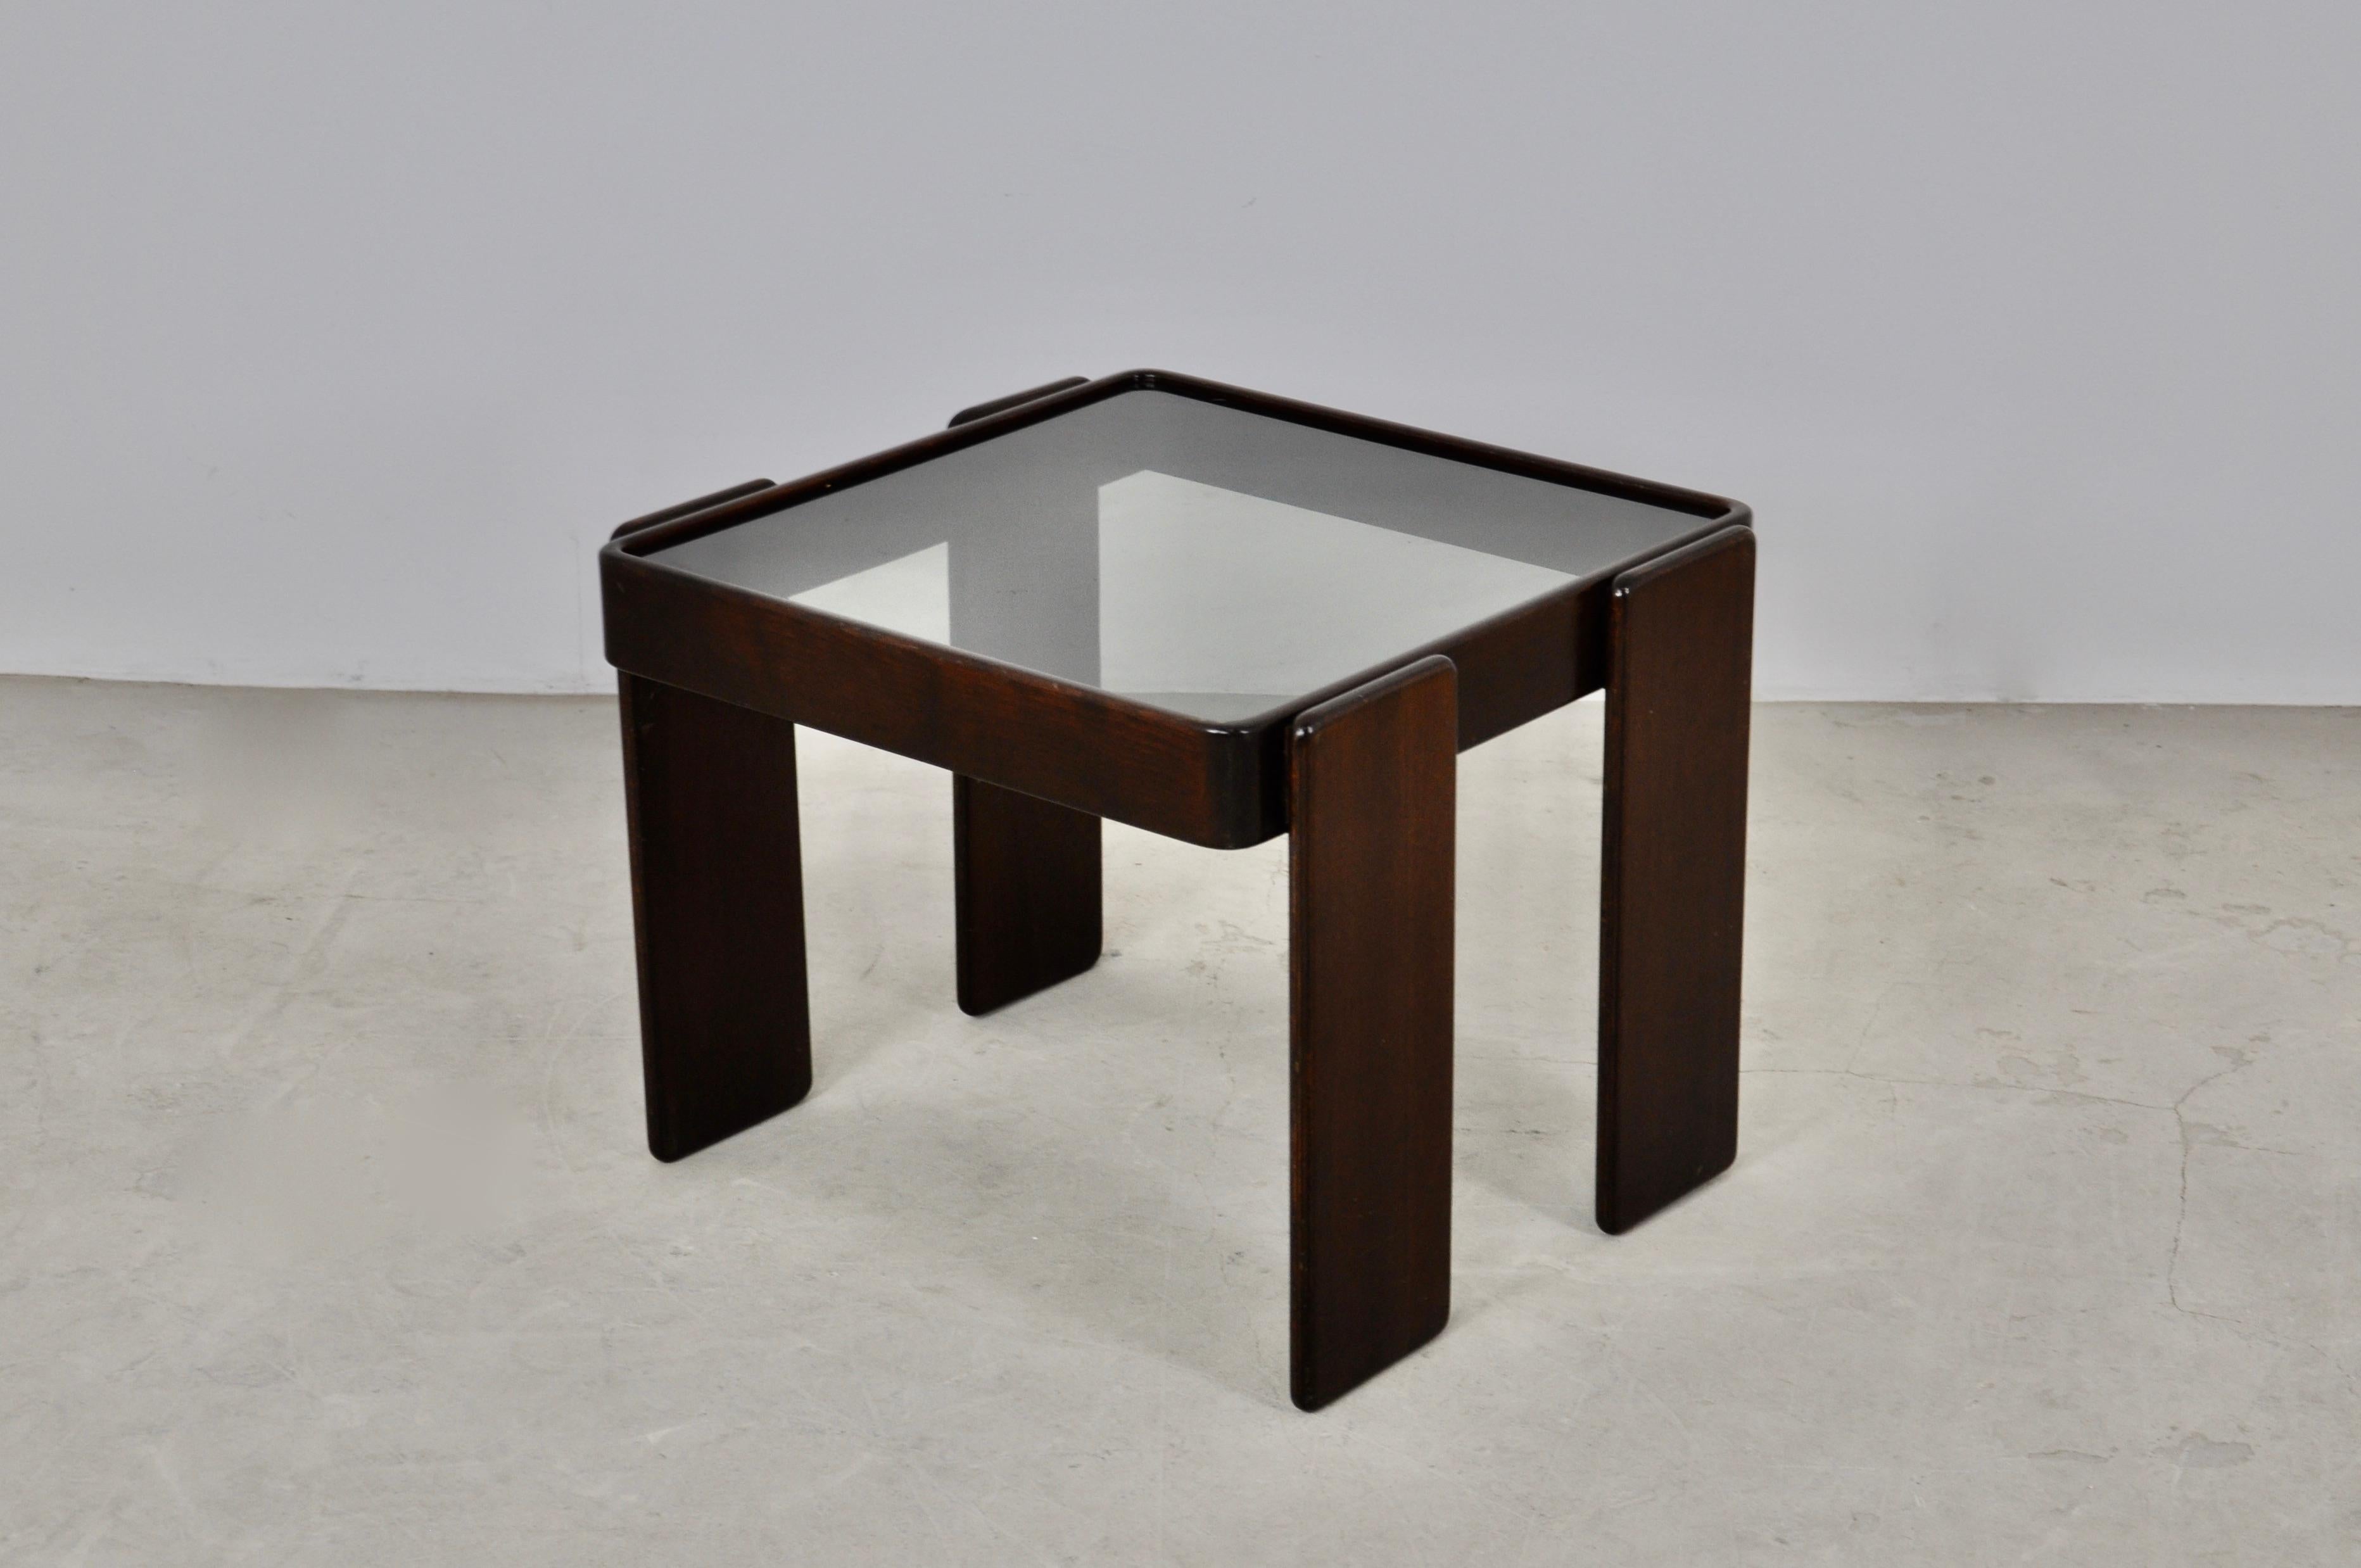 Wooden table and smoked glass top. Wear due to time and age of the table.